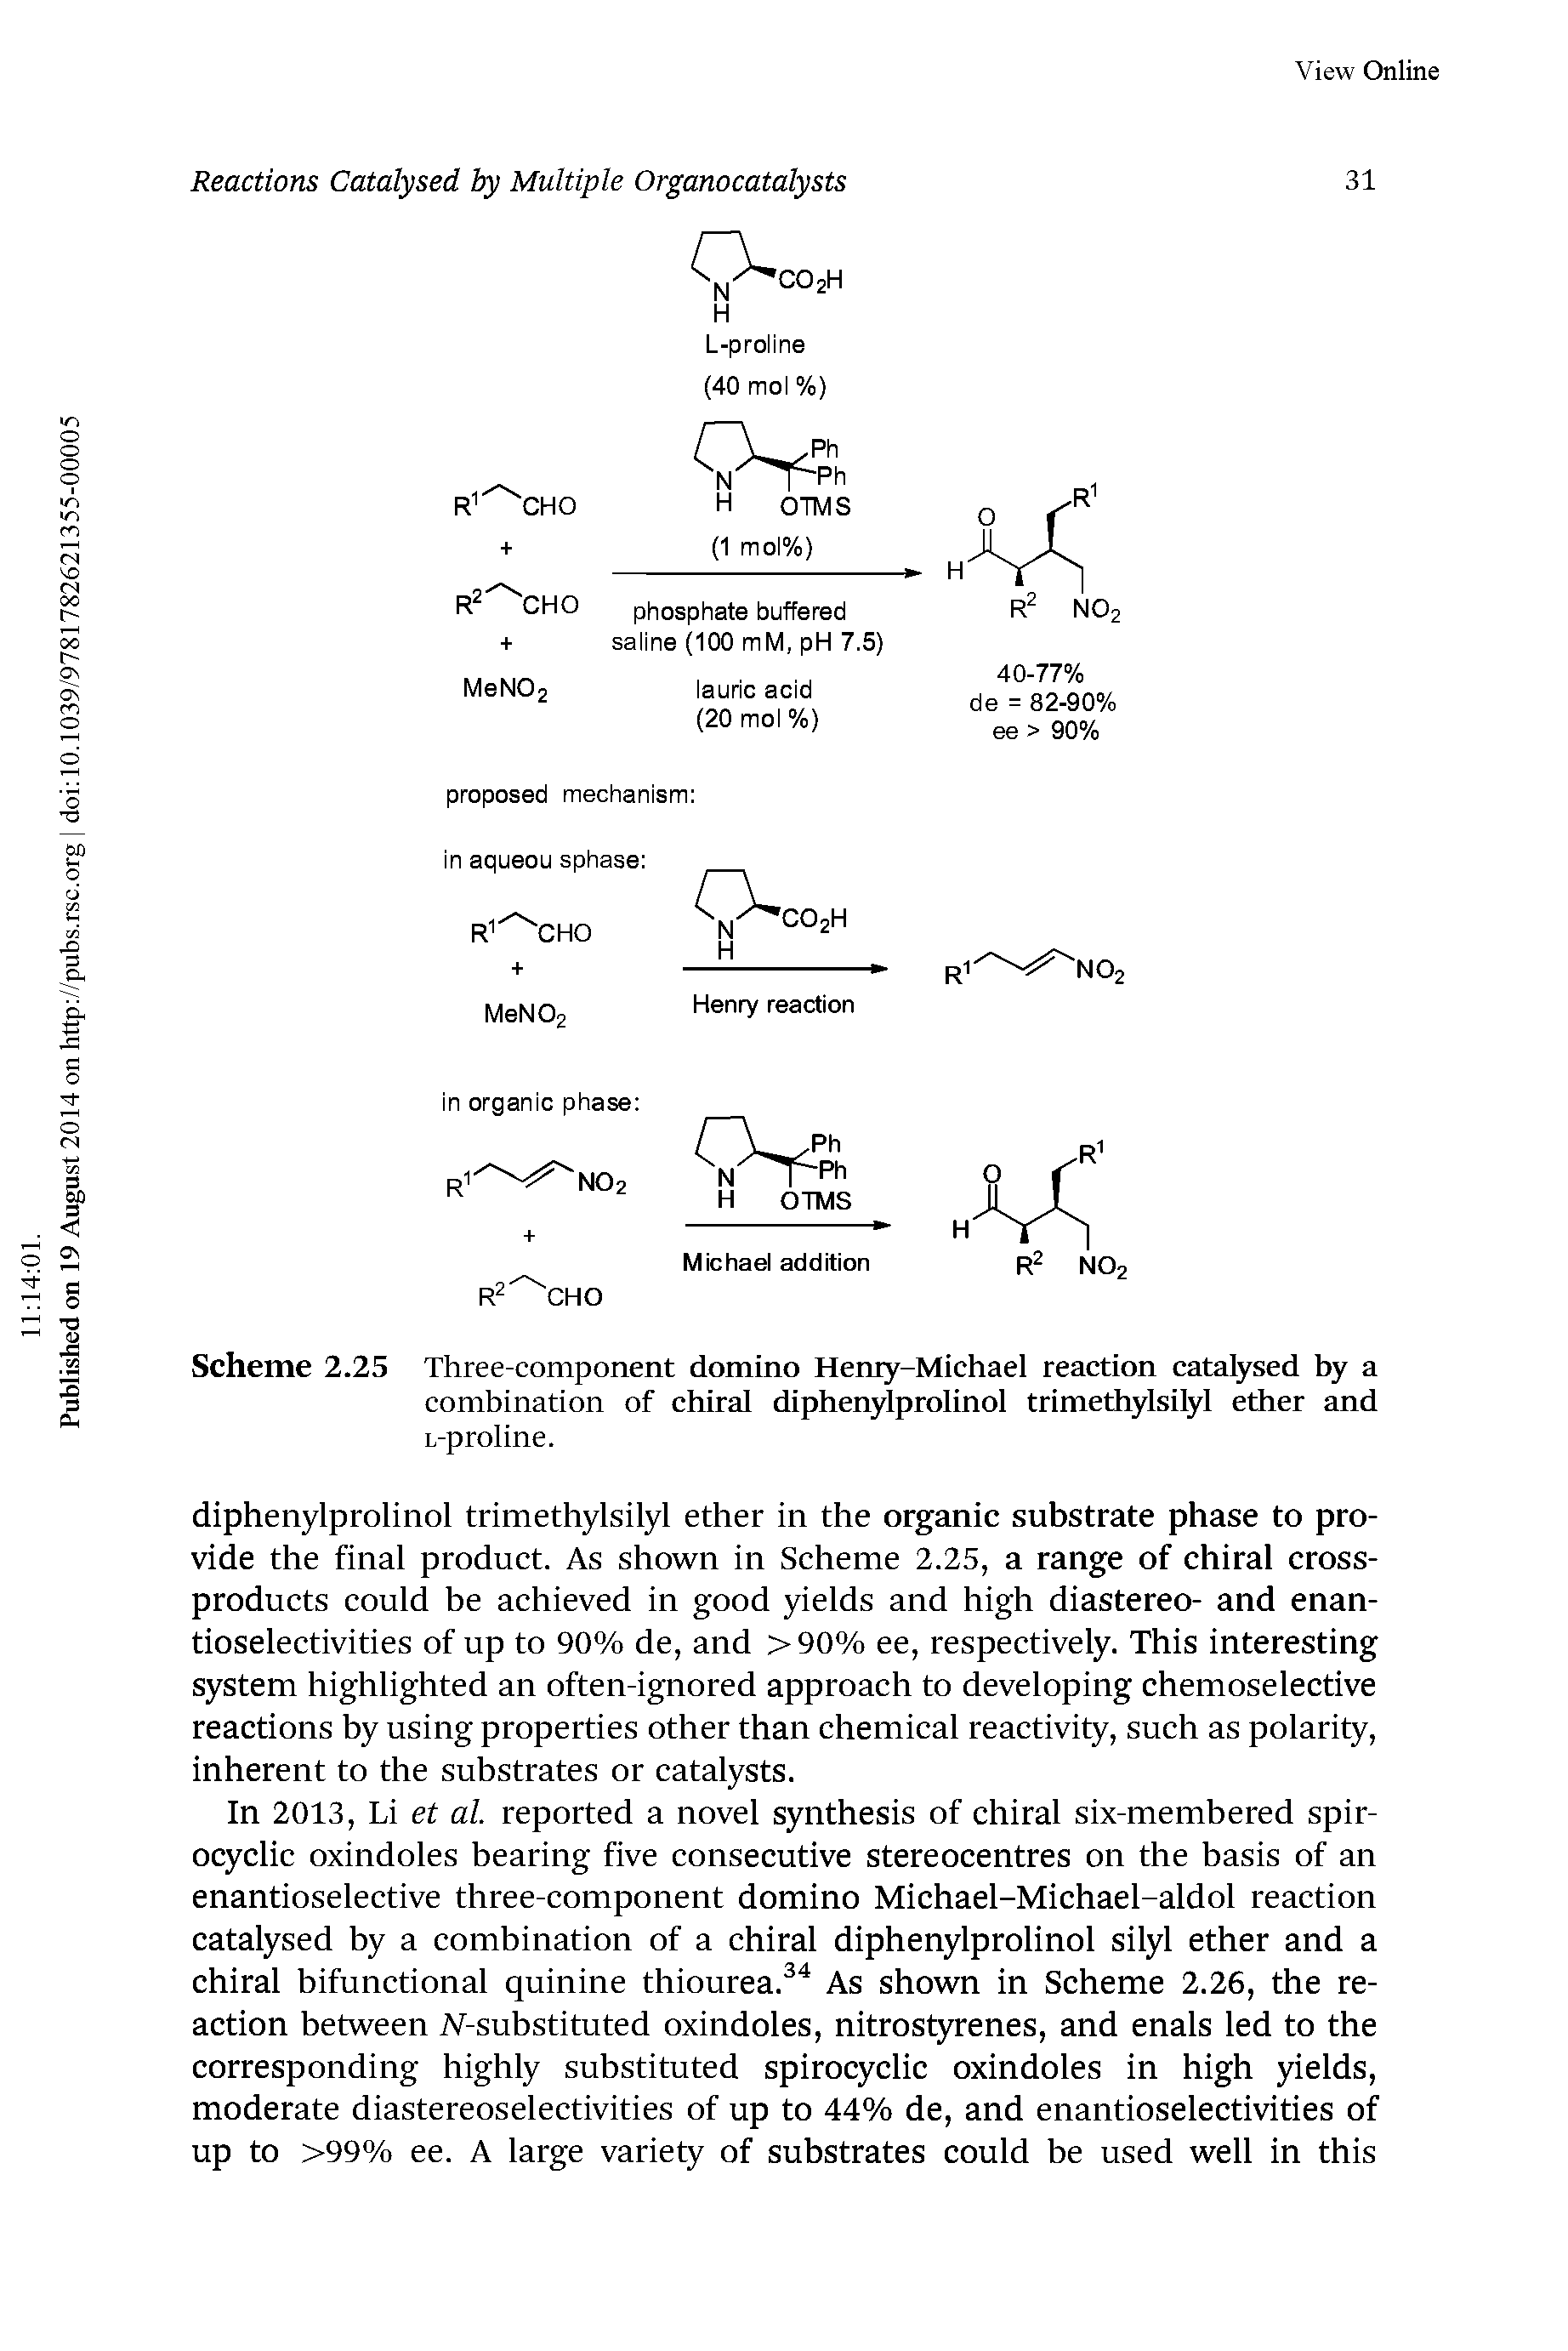 Scheme 2.25 Three-component domino Henry-Michael reaction catalysed by a combination of chiral diphenylprolinol trimethylsilyl ether and L-proline.